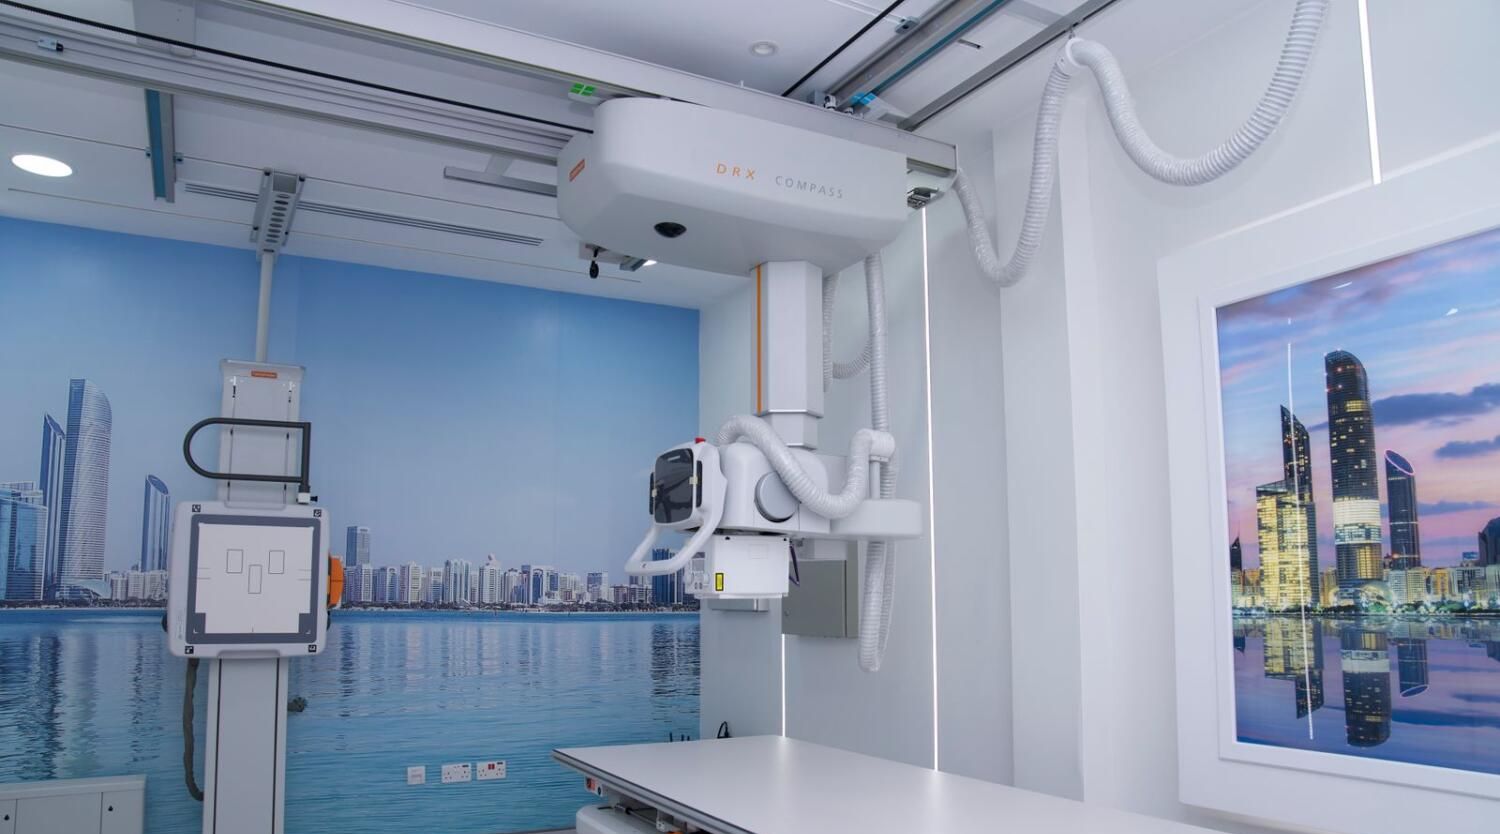 Abu Dhabi: SEHA opens new medical imaging facility to reduce patients' waiting time